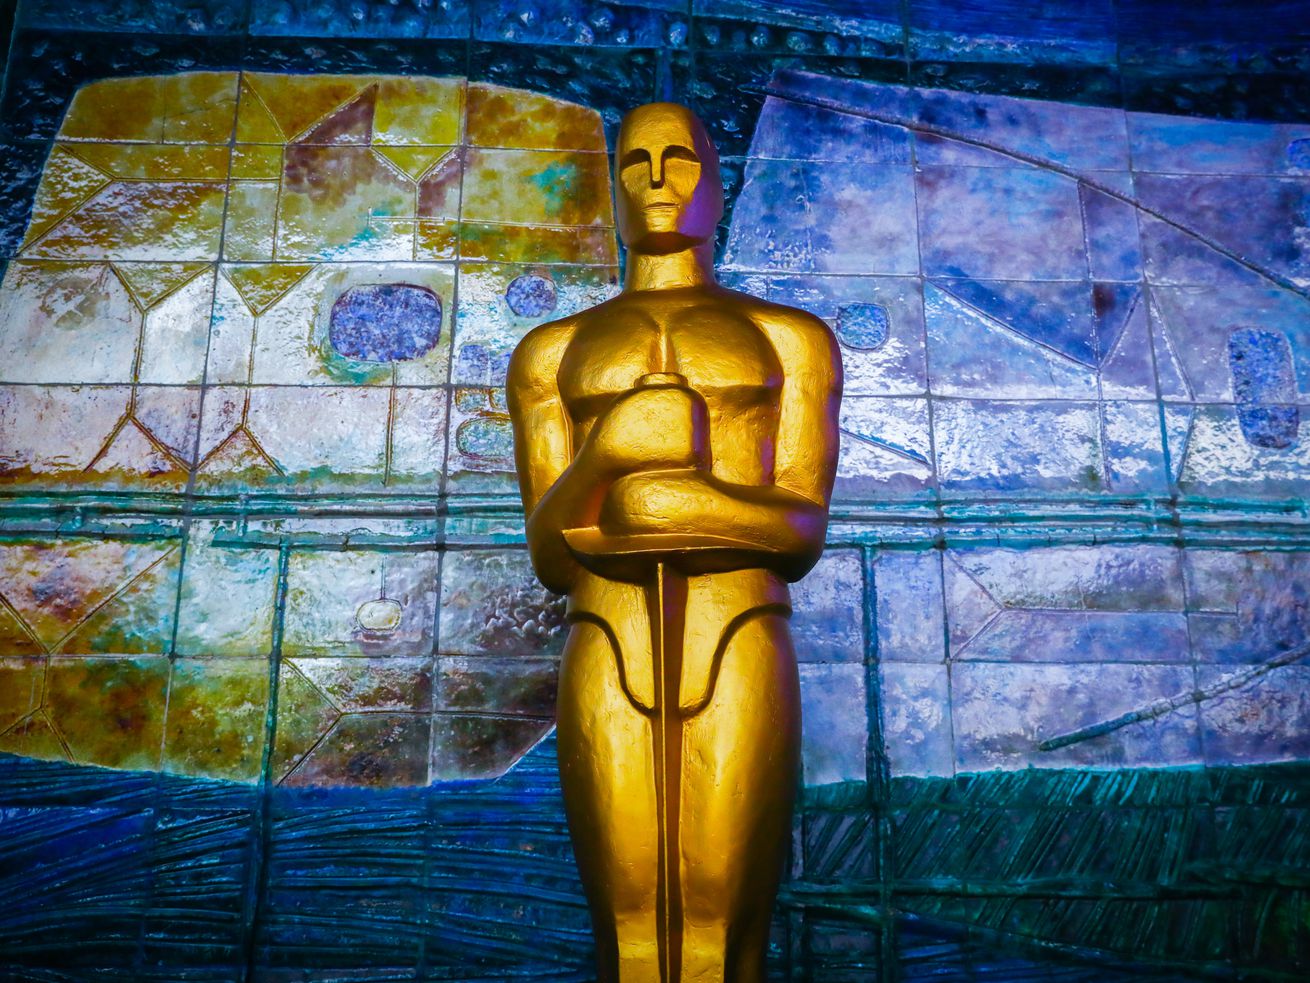 The 2021 Oscars have been shrouded in mystery. Here’s what to expect.